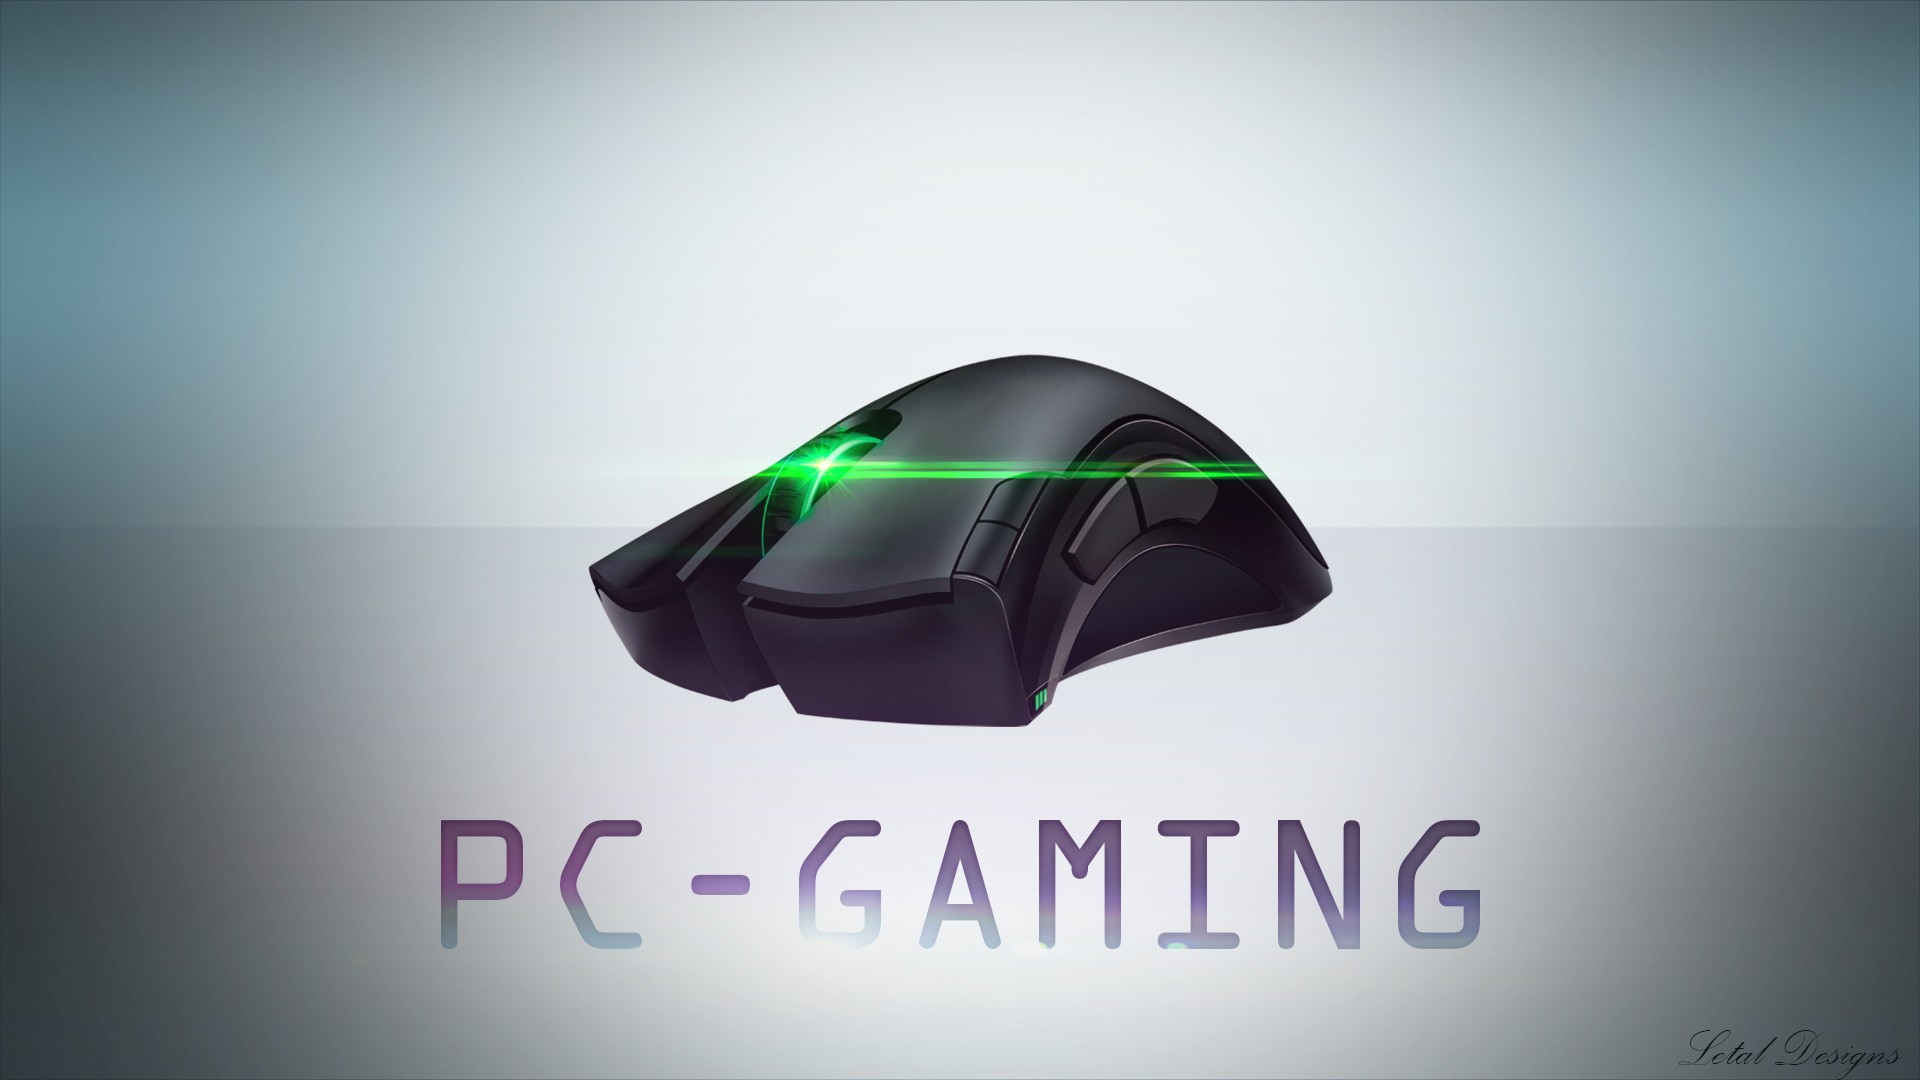 video Games, PC Gaming, Computer Mice, Typography Wallpaper